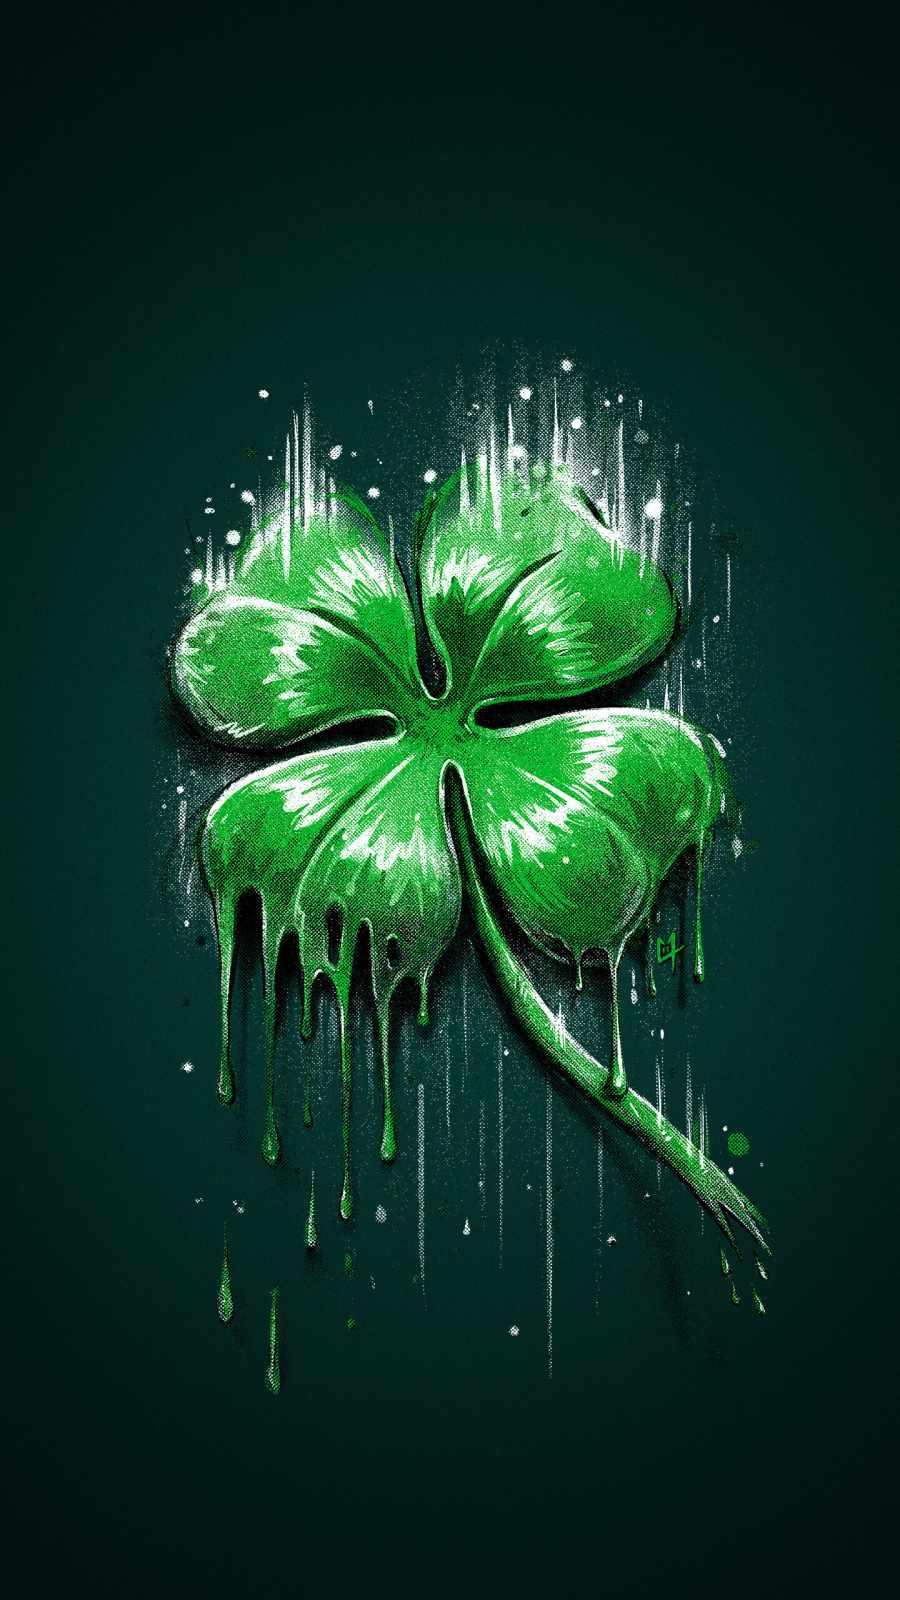 Four Leaf Clover IPhone Wallpaper HD  IPhone Wallpapers